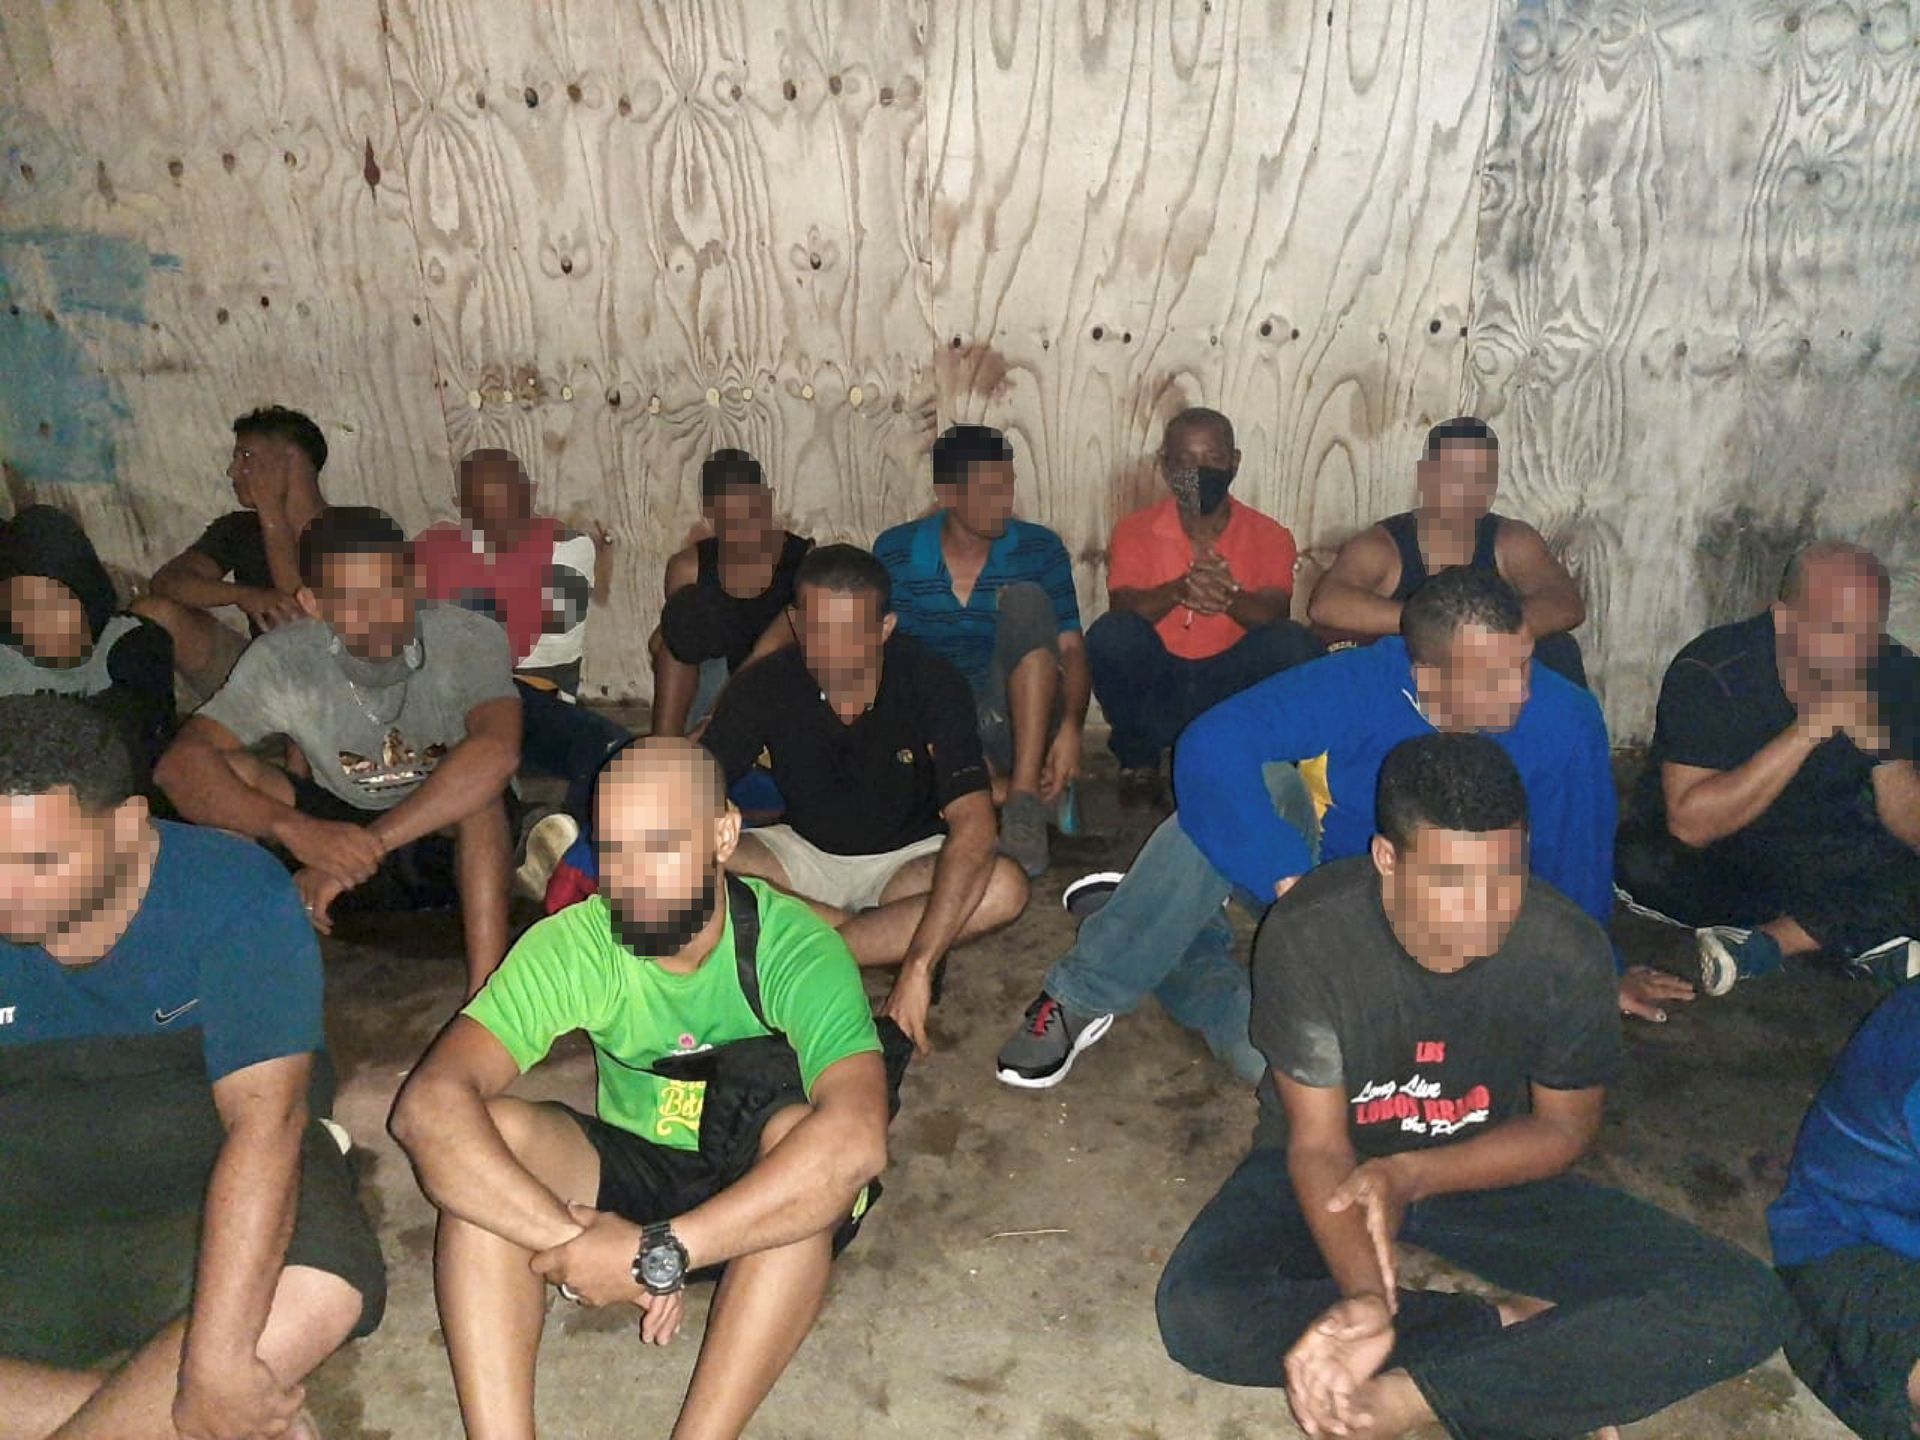 Some of the Venezuelan migrants arrested on July 16 by T&T Coast Guard sit outside the Cedros Security Complex. (Trinidad and Tobago Guardian)